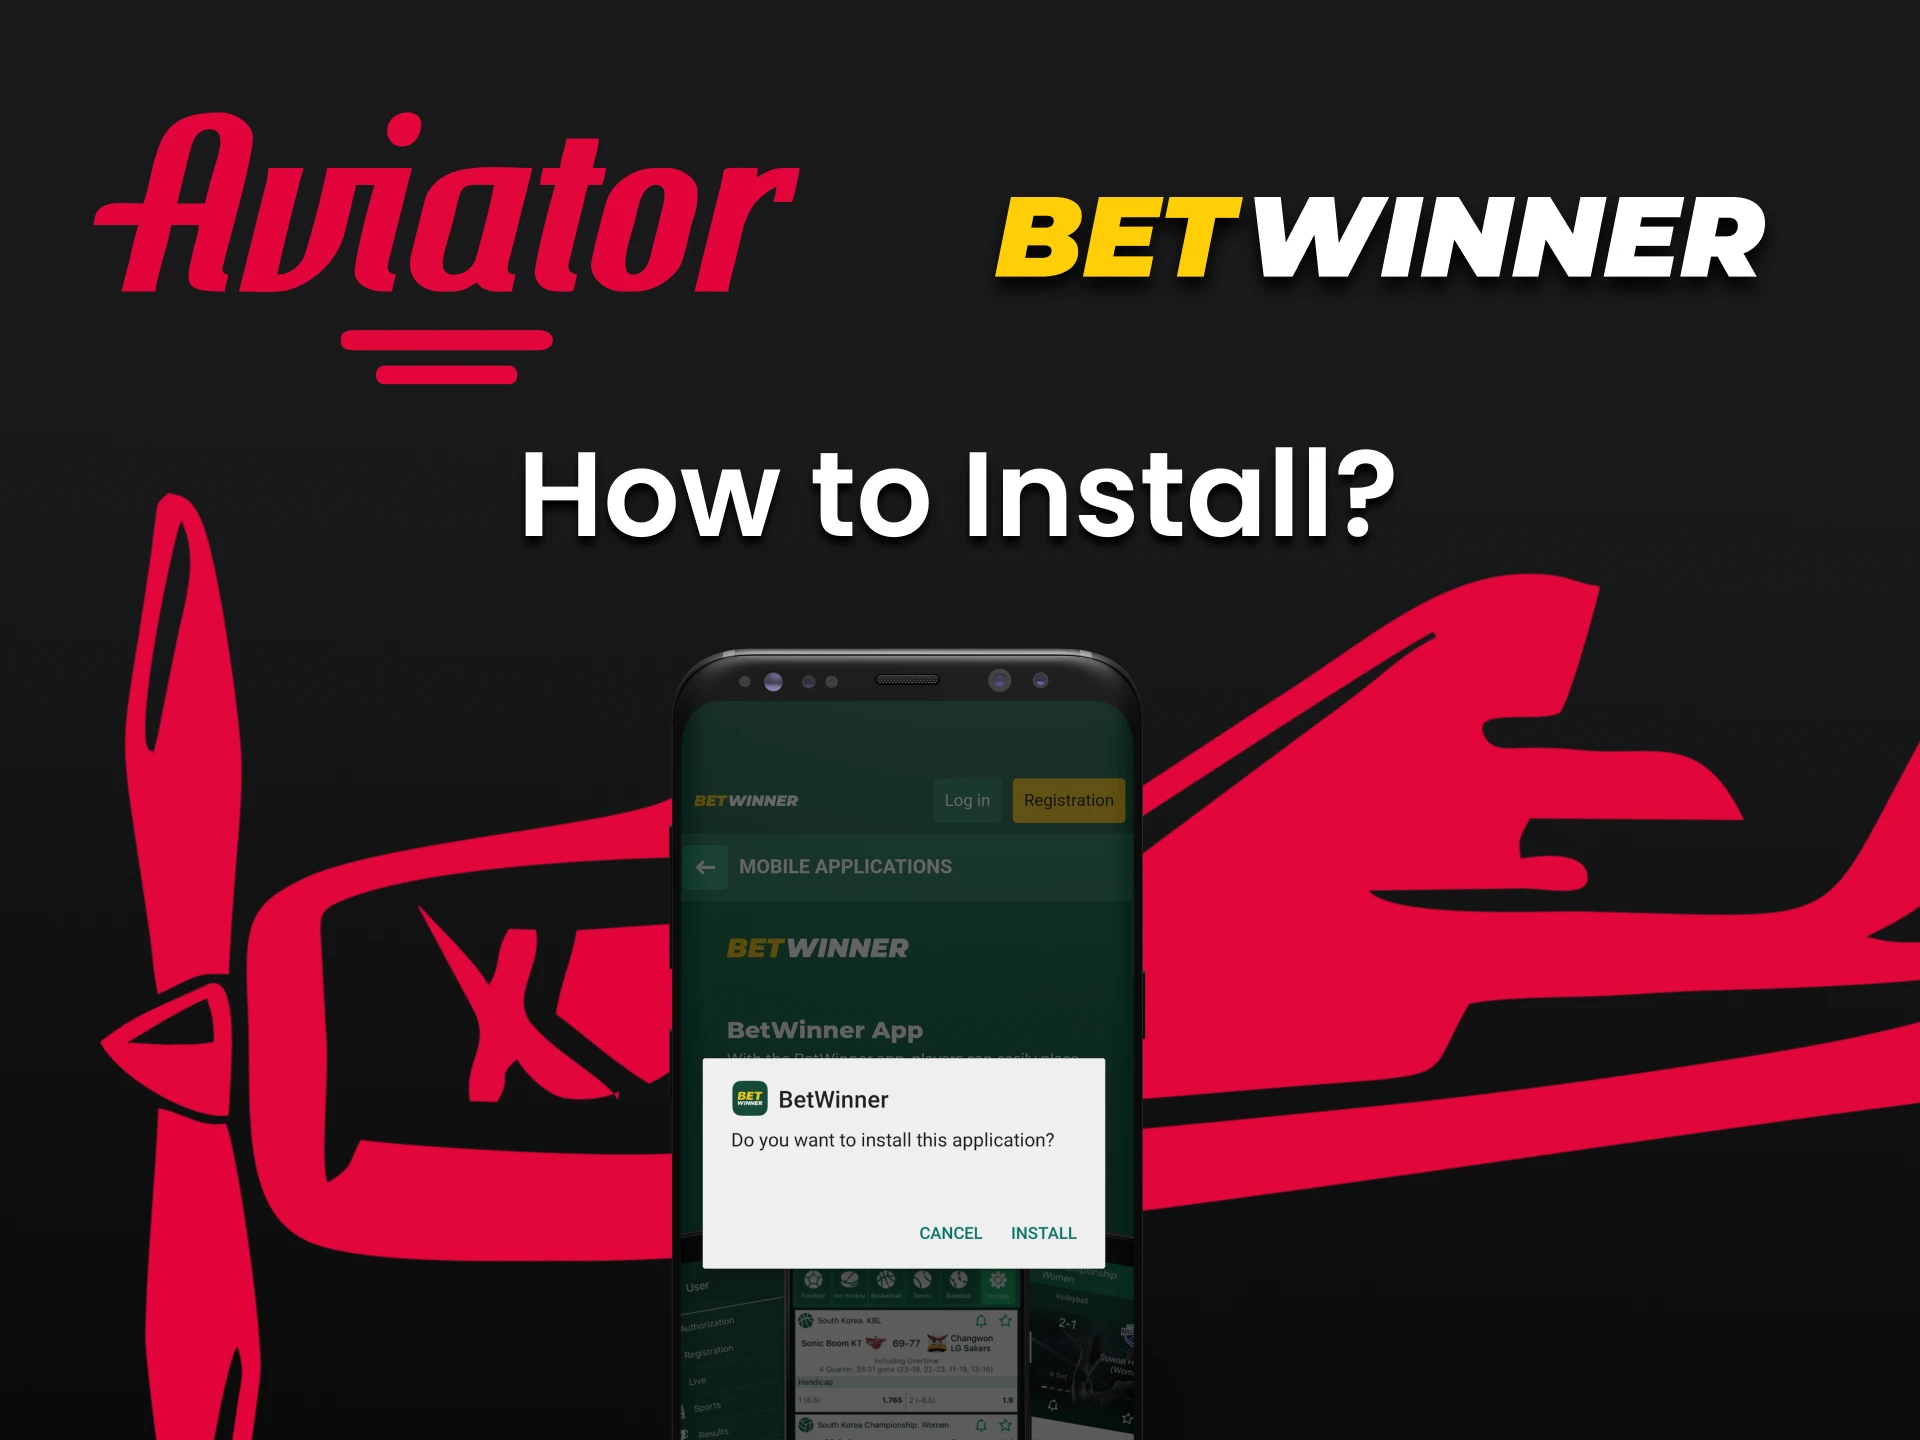 Find out how to install the Betwinner application to play Aviator.